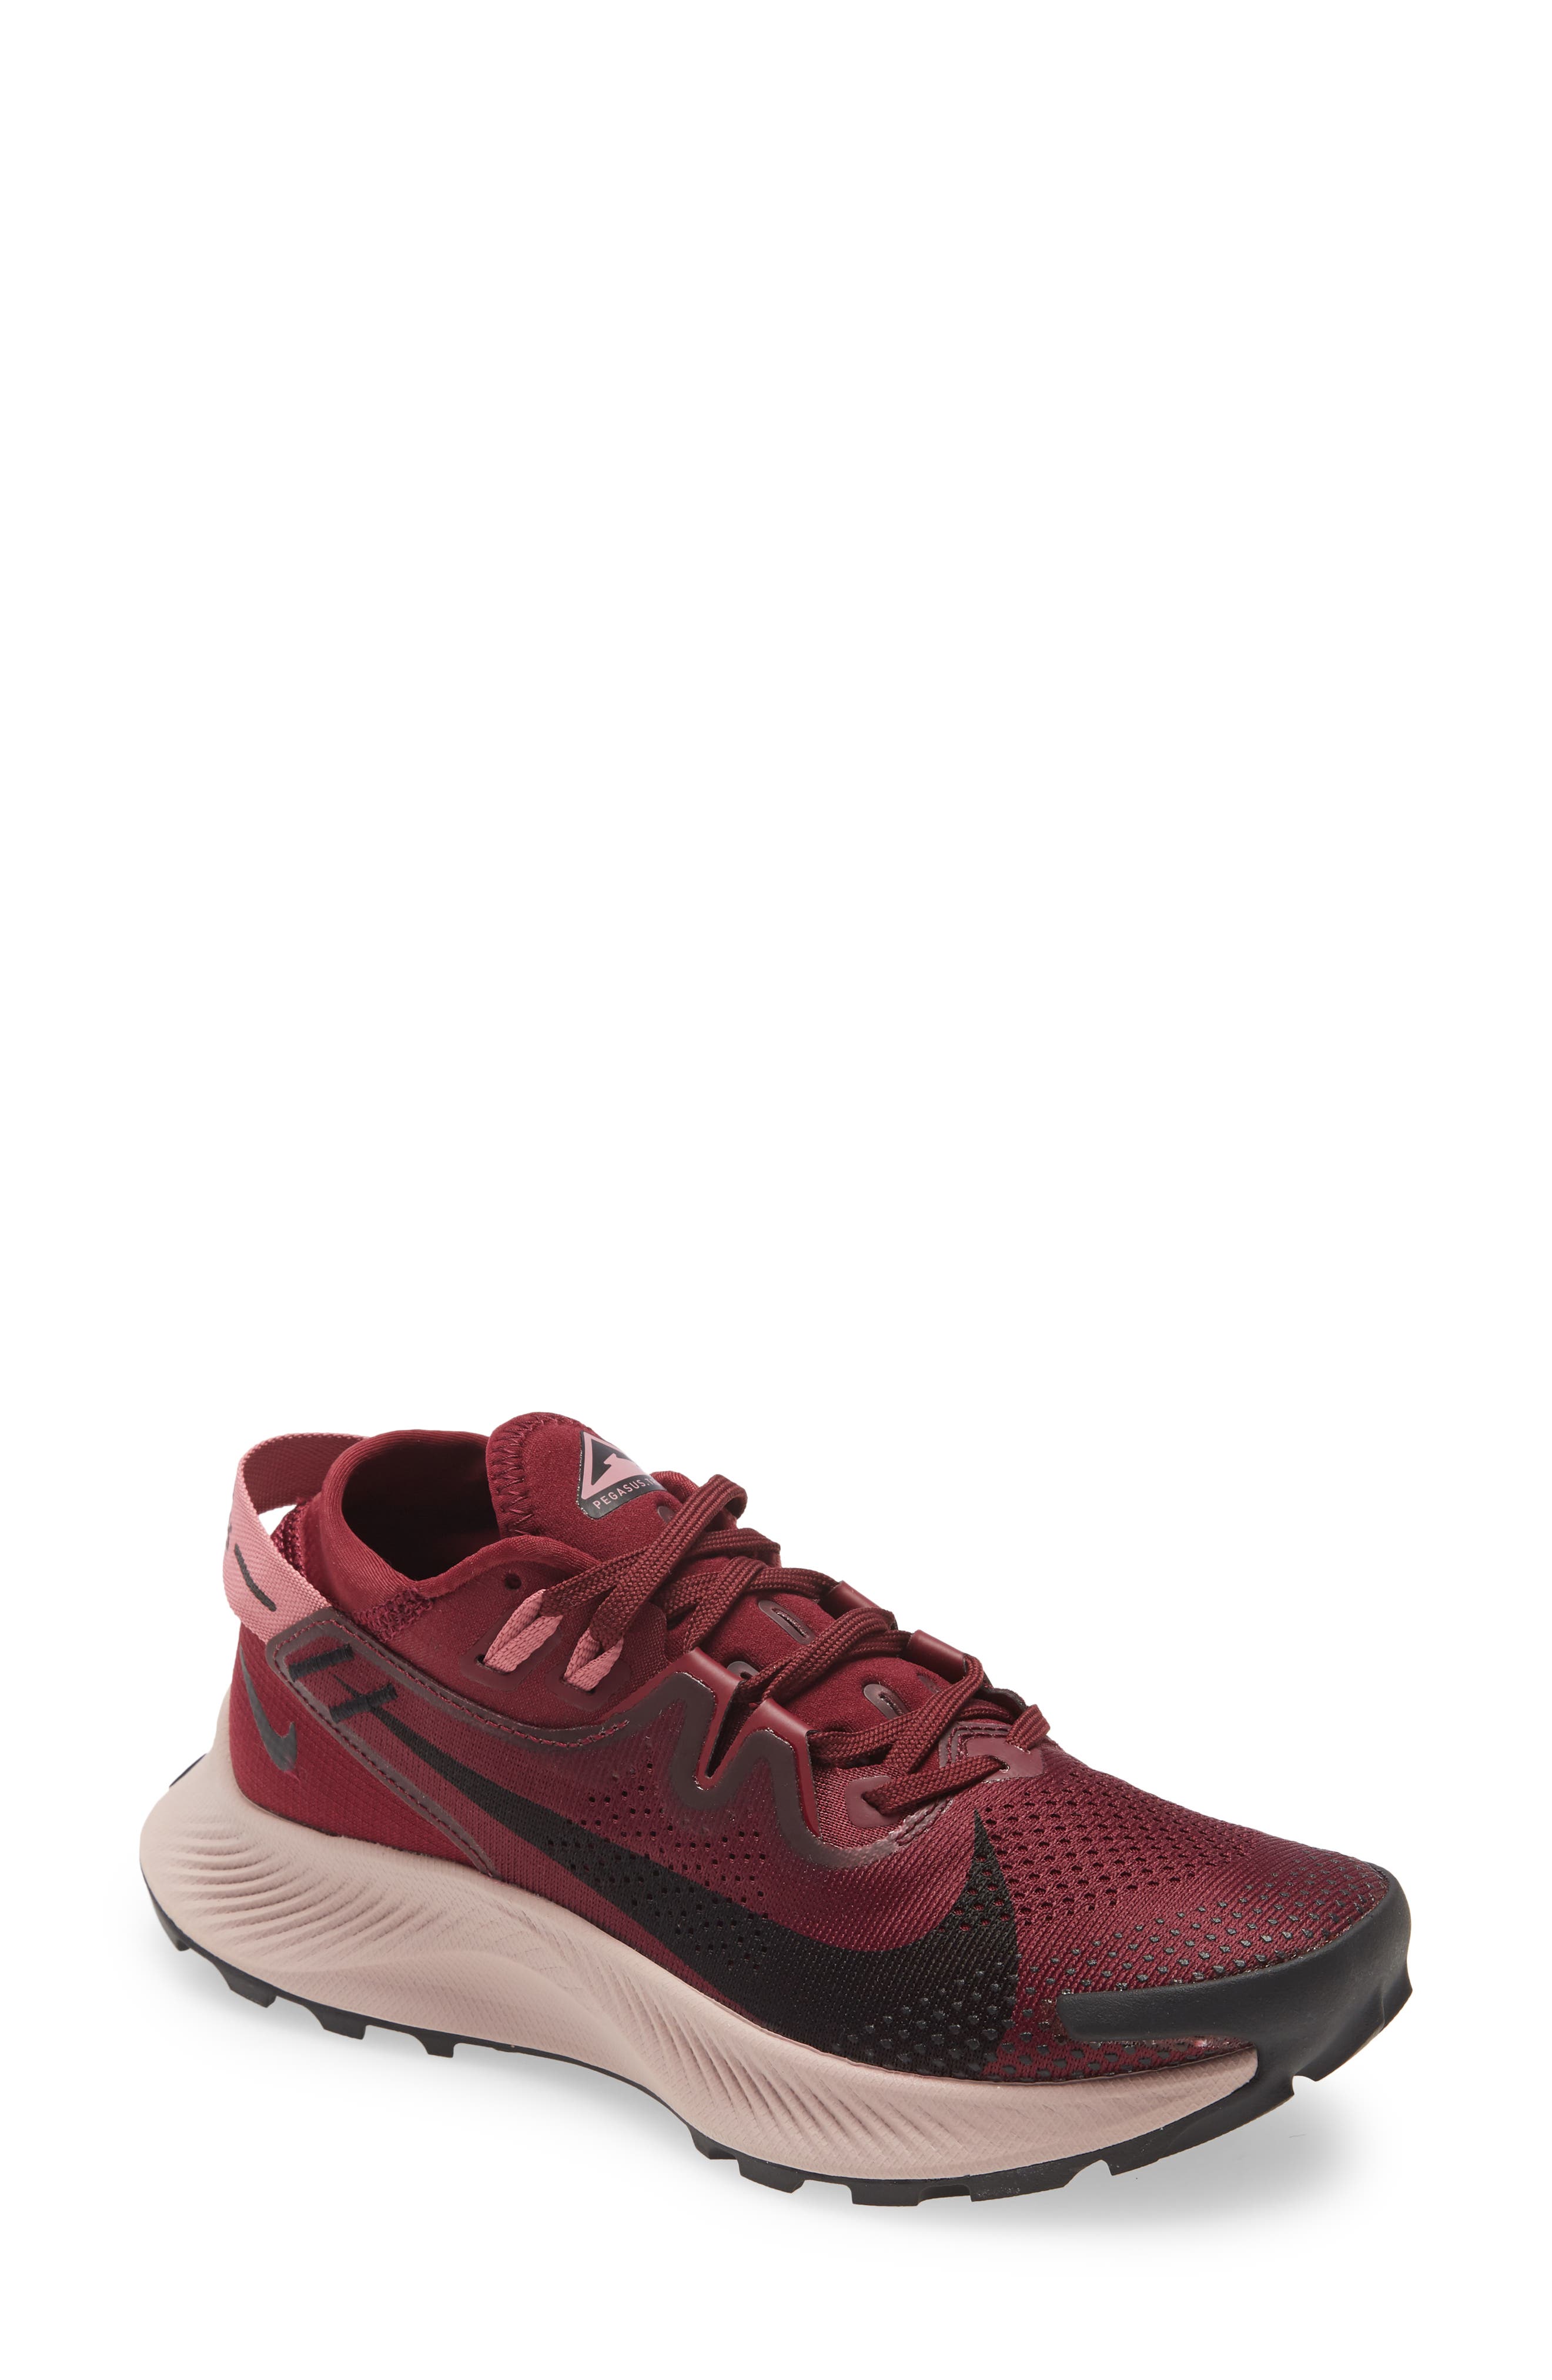 Red Sneakers \u0026 Athletic Shoes | Nordstrom